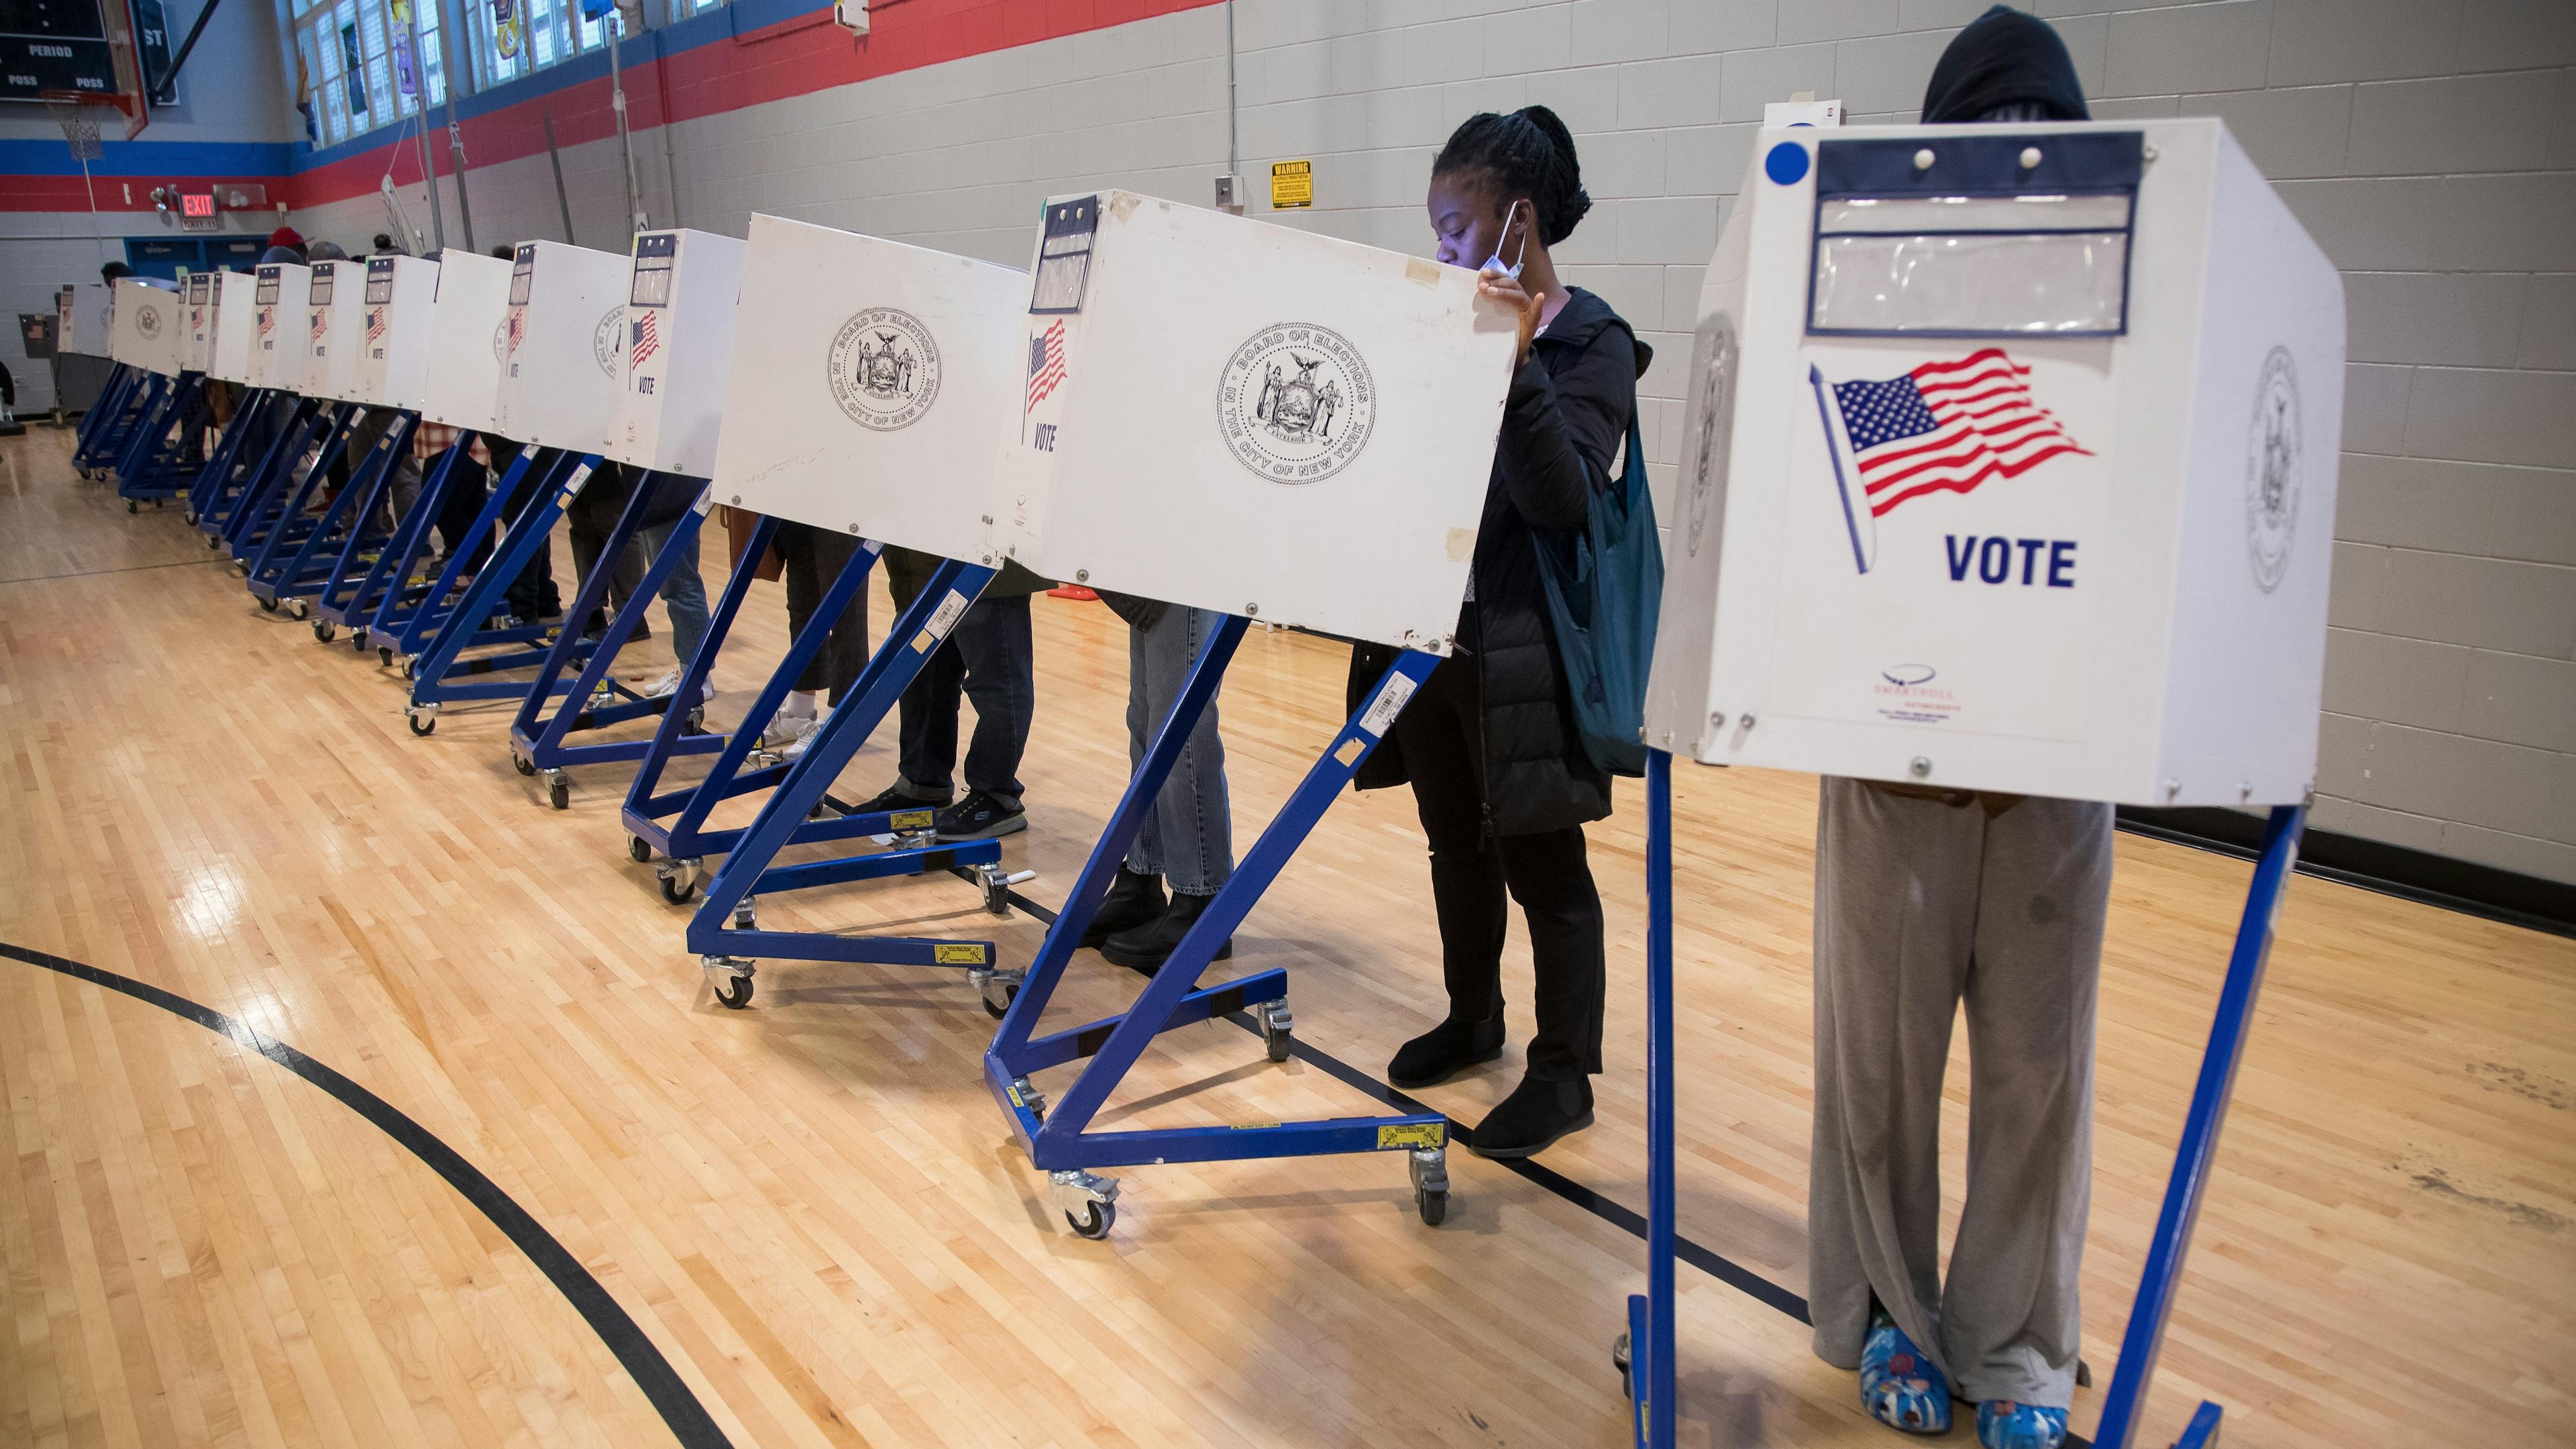 People filling out ballots in a gym